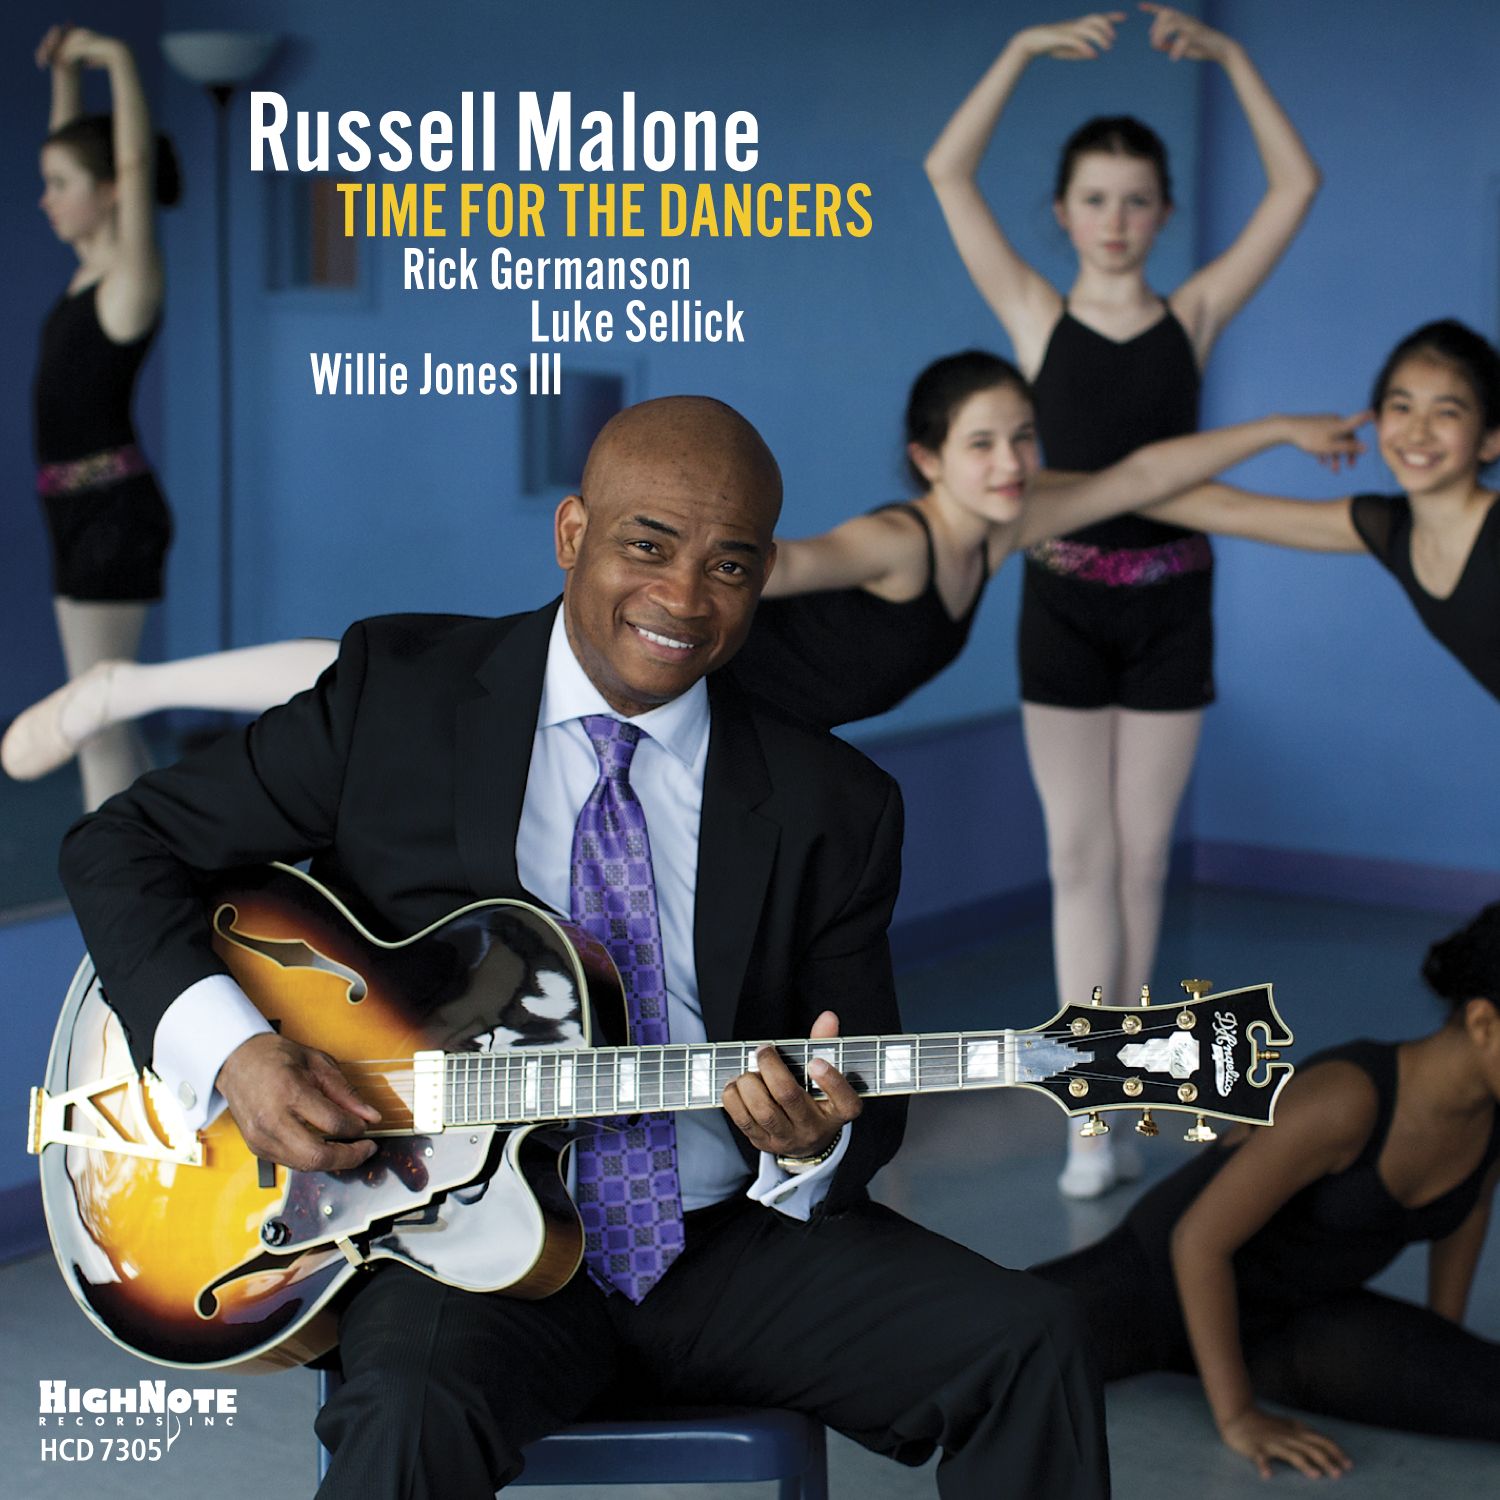 Russell Malone - Time For The Dancers (2017) [HDTracks FLAC 24bit/96kHz]